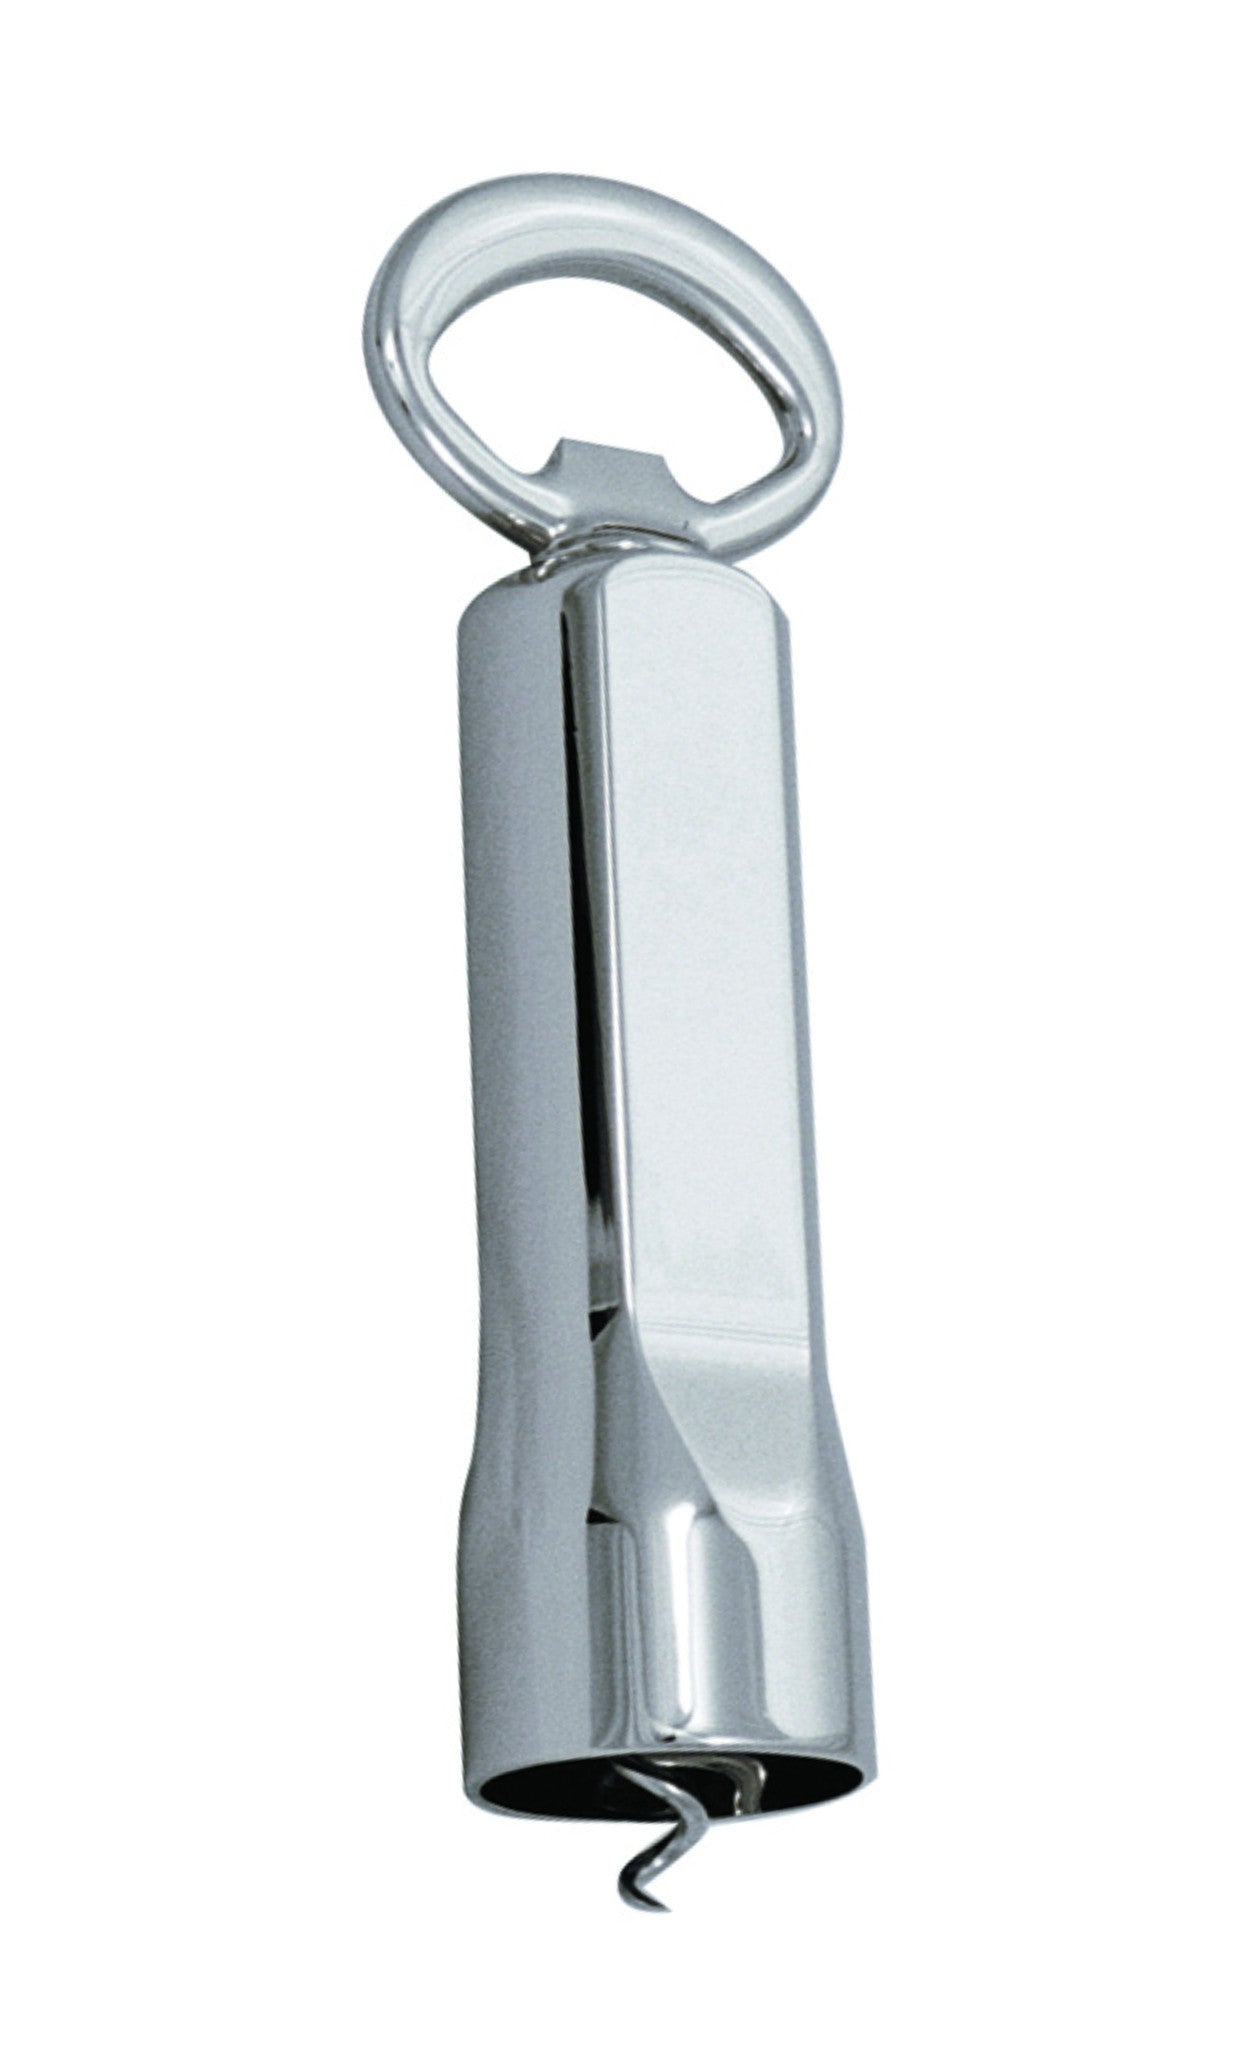 Silver covered corkscrew and bottle opener